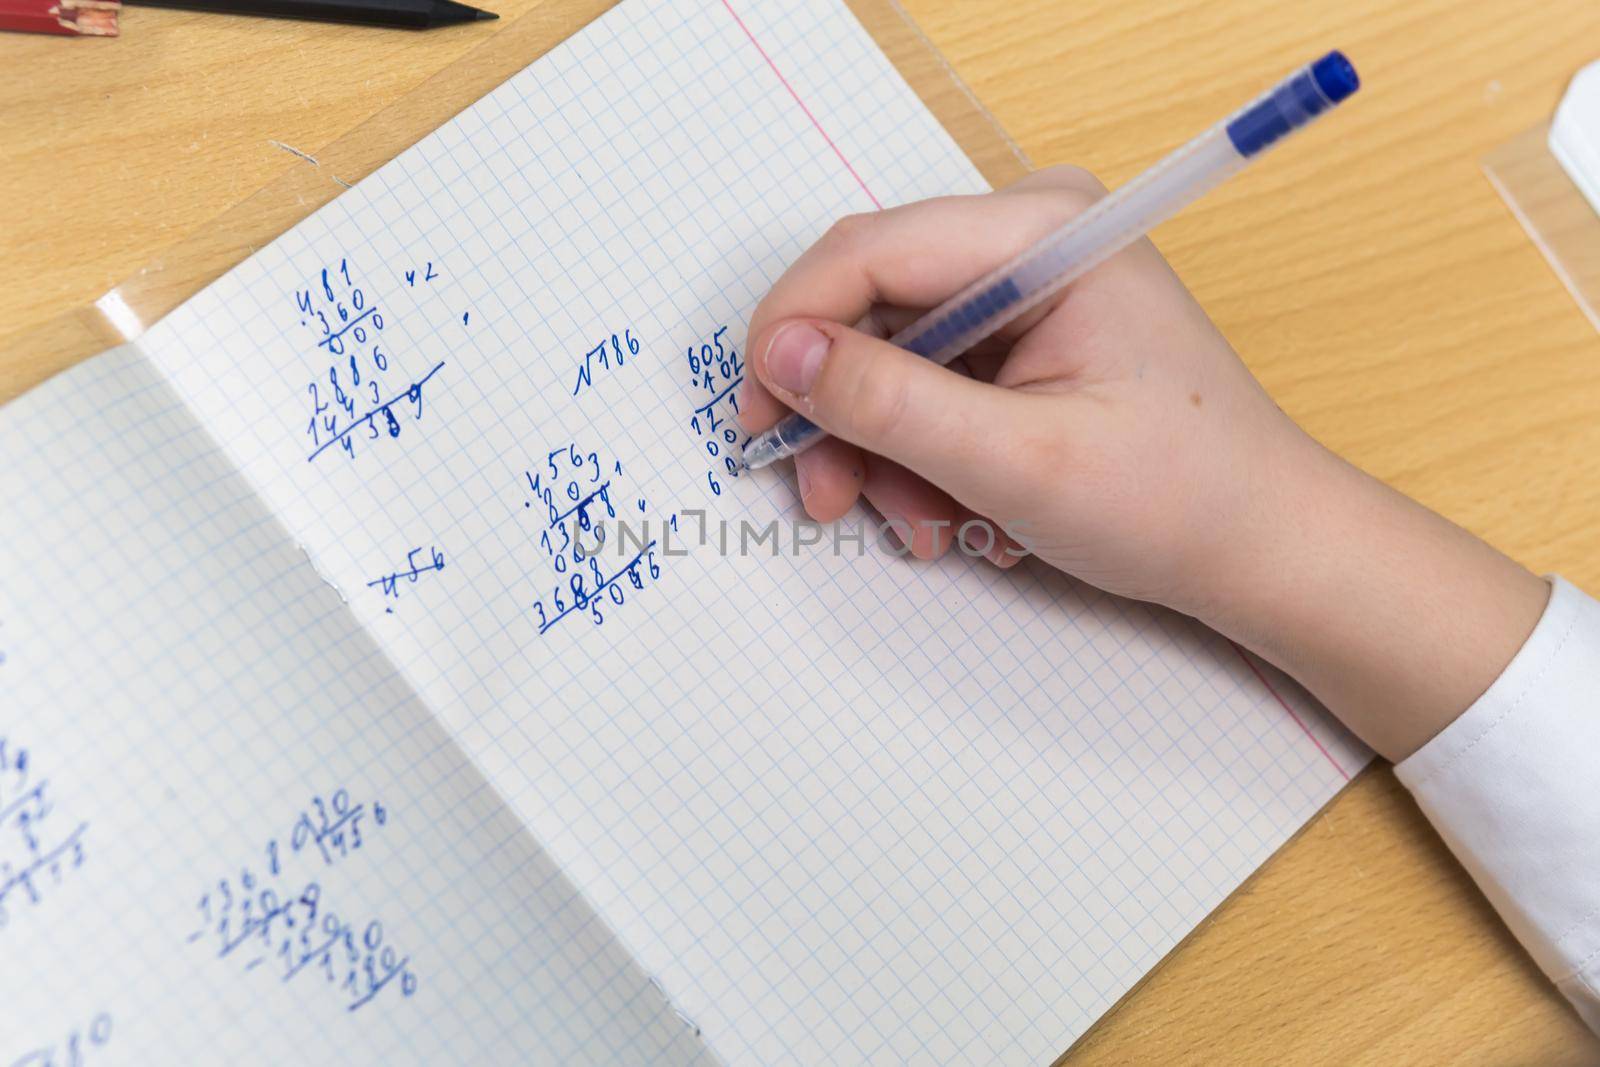 The girls hand with a fountain pen with blue ink solves examples in mathematics. The student completes the task in teradi. A schoolboy teaches lessons at a school desk. Warm soft daylight.